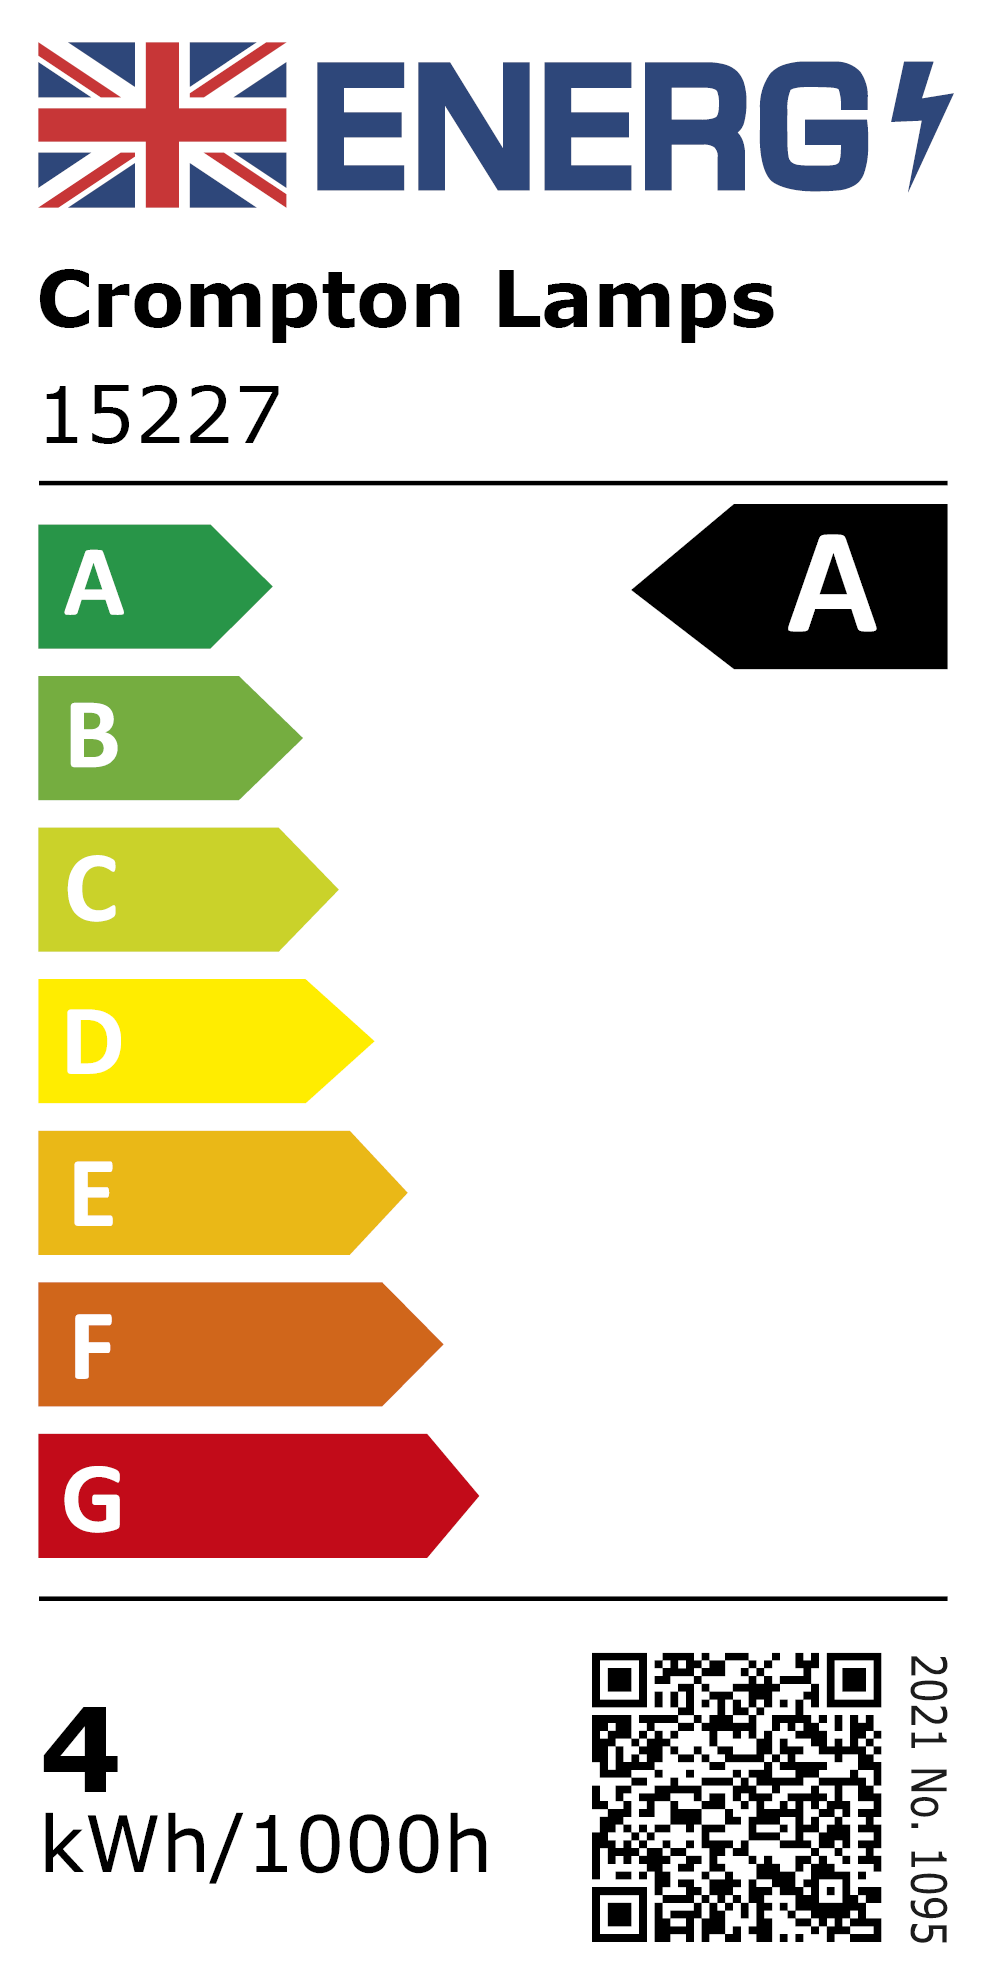 New 2021 Energy Rating Label: Stock Code 15227